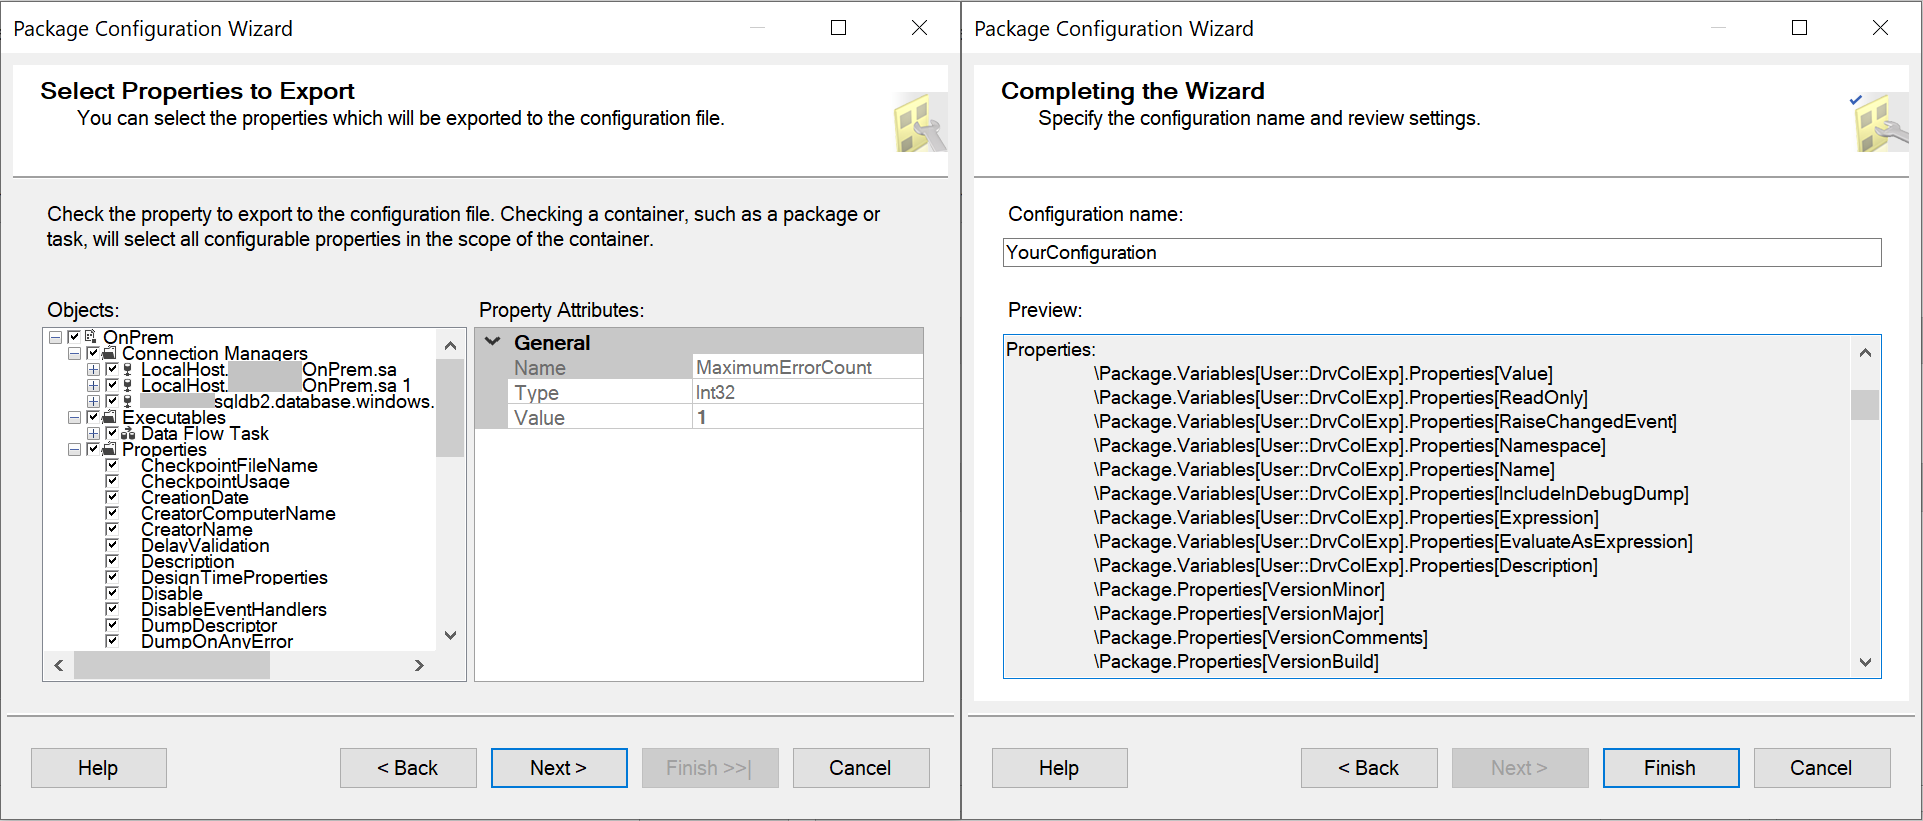 Get package properties from SSDT - Configuration wizard